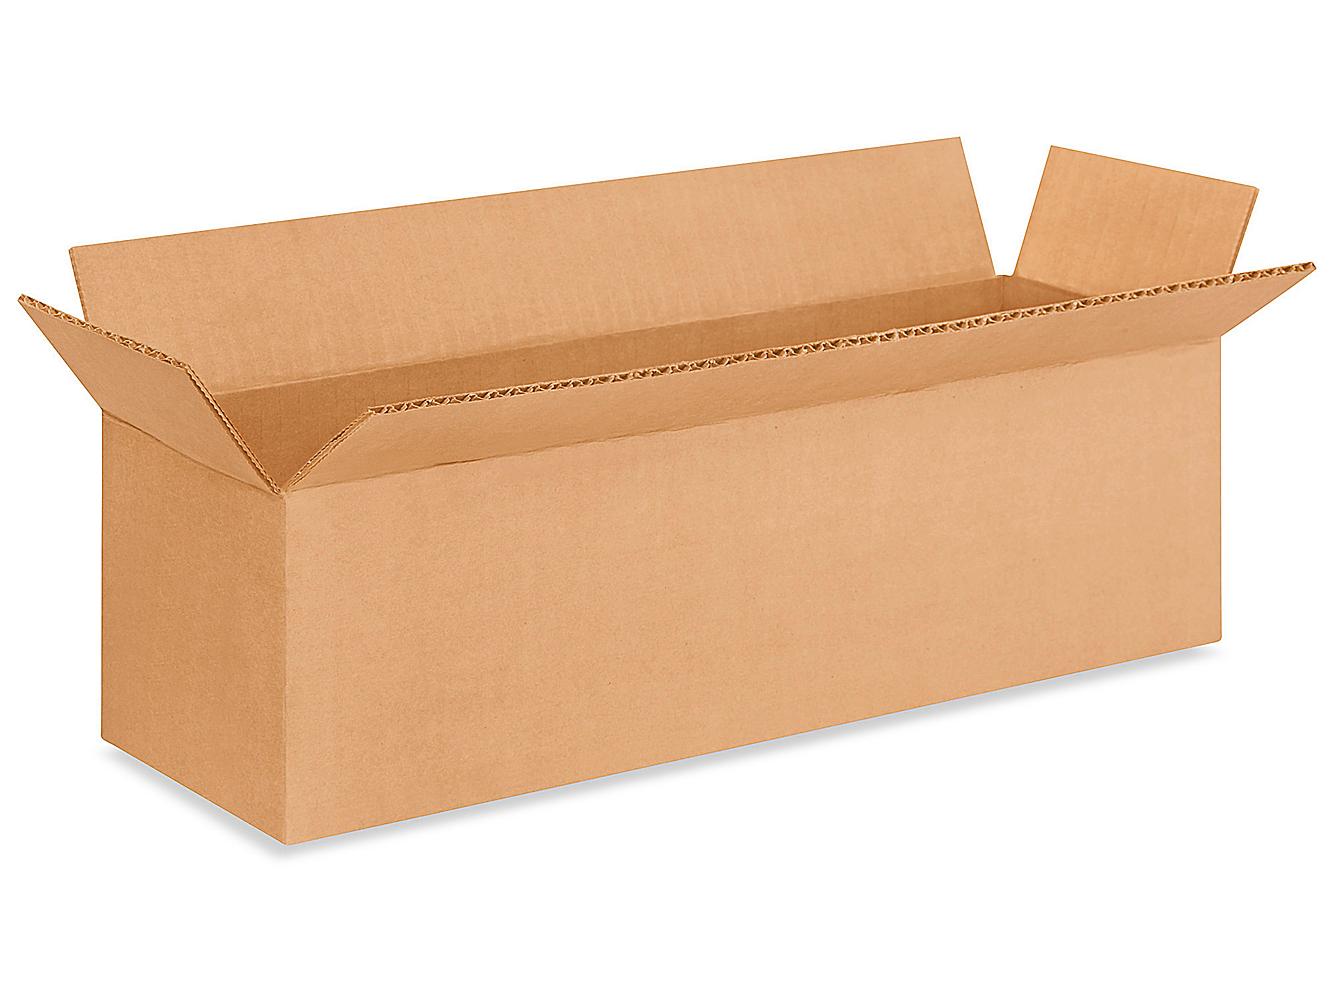 150 Boxes 150 7x4x4 Corrugated Packing Shipping Carton Boxes 